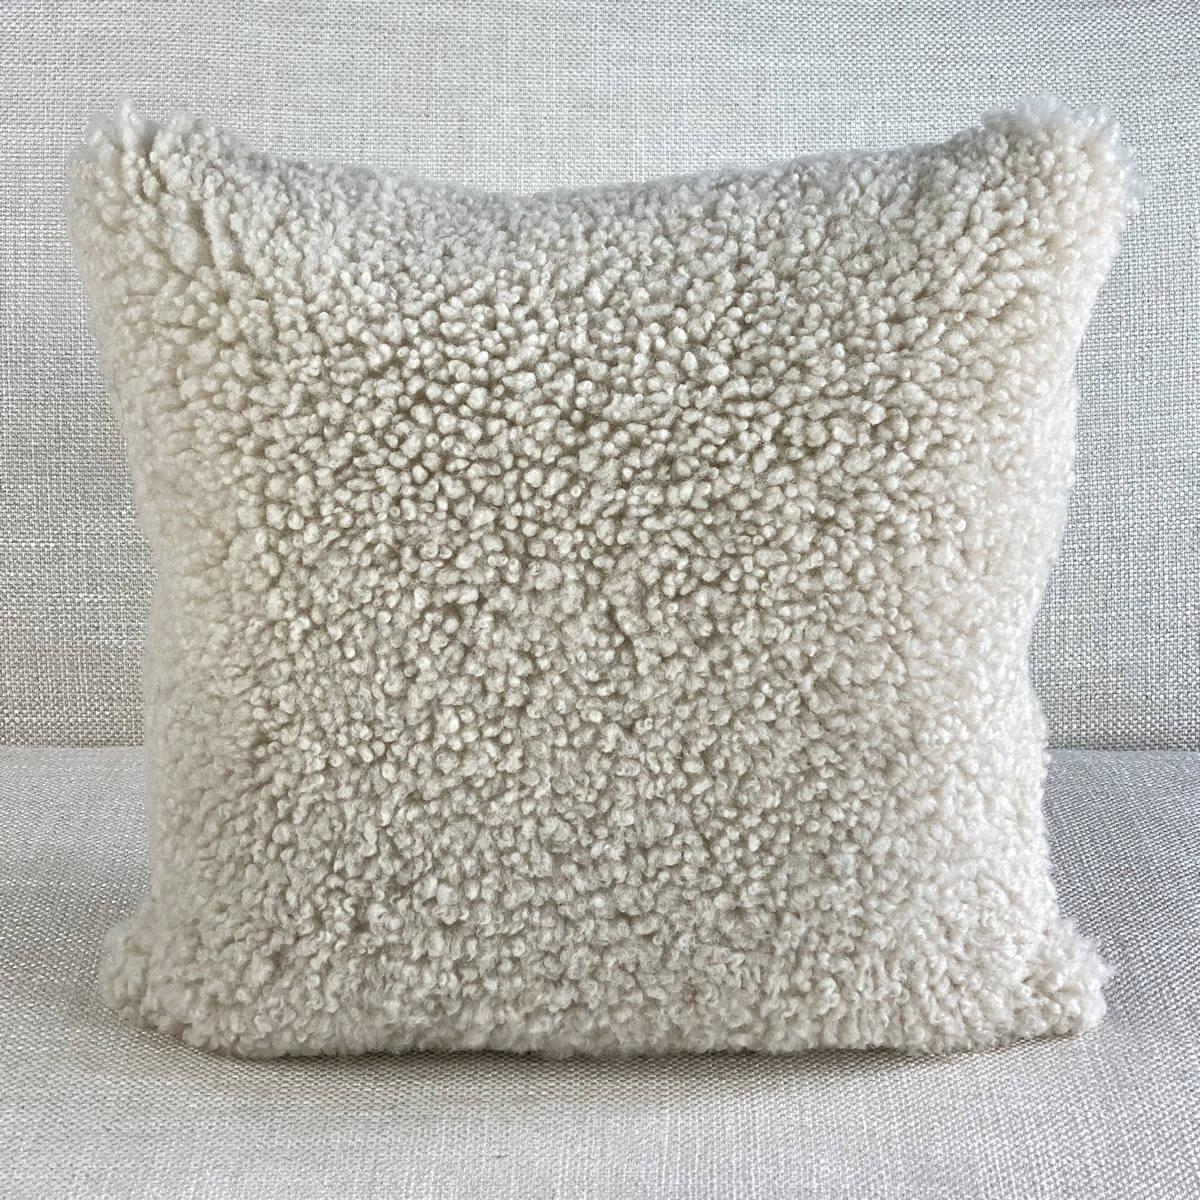 Add layers of natural textures to your living room or bedroom decor with this captivating shearling sheepskin pillow. Its tight curly wool pile translates stylish comfort and expresses natural signature living.
This Australian made pillow is